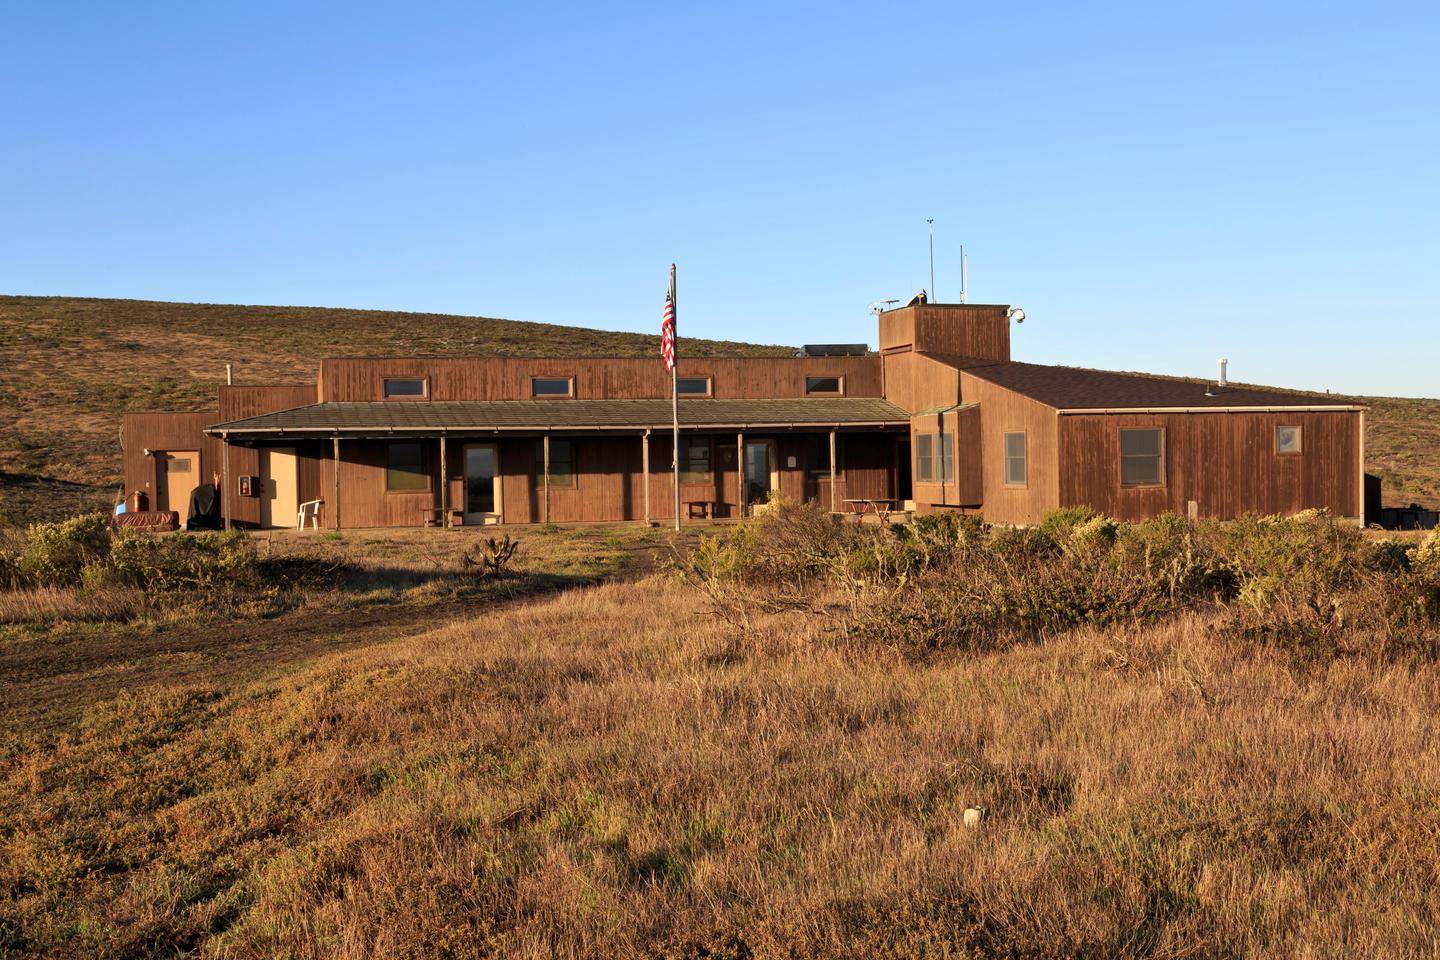 San Miguel Island Visitor Contact and Ranger Station